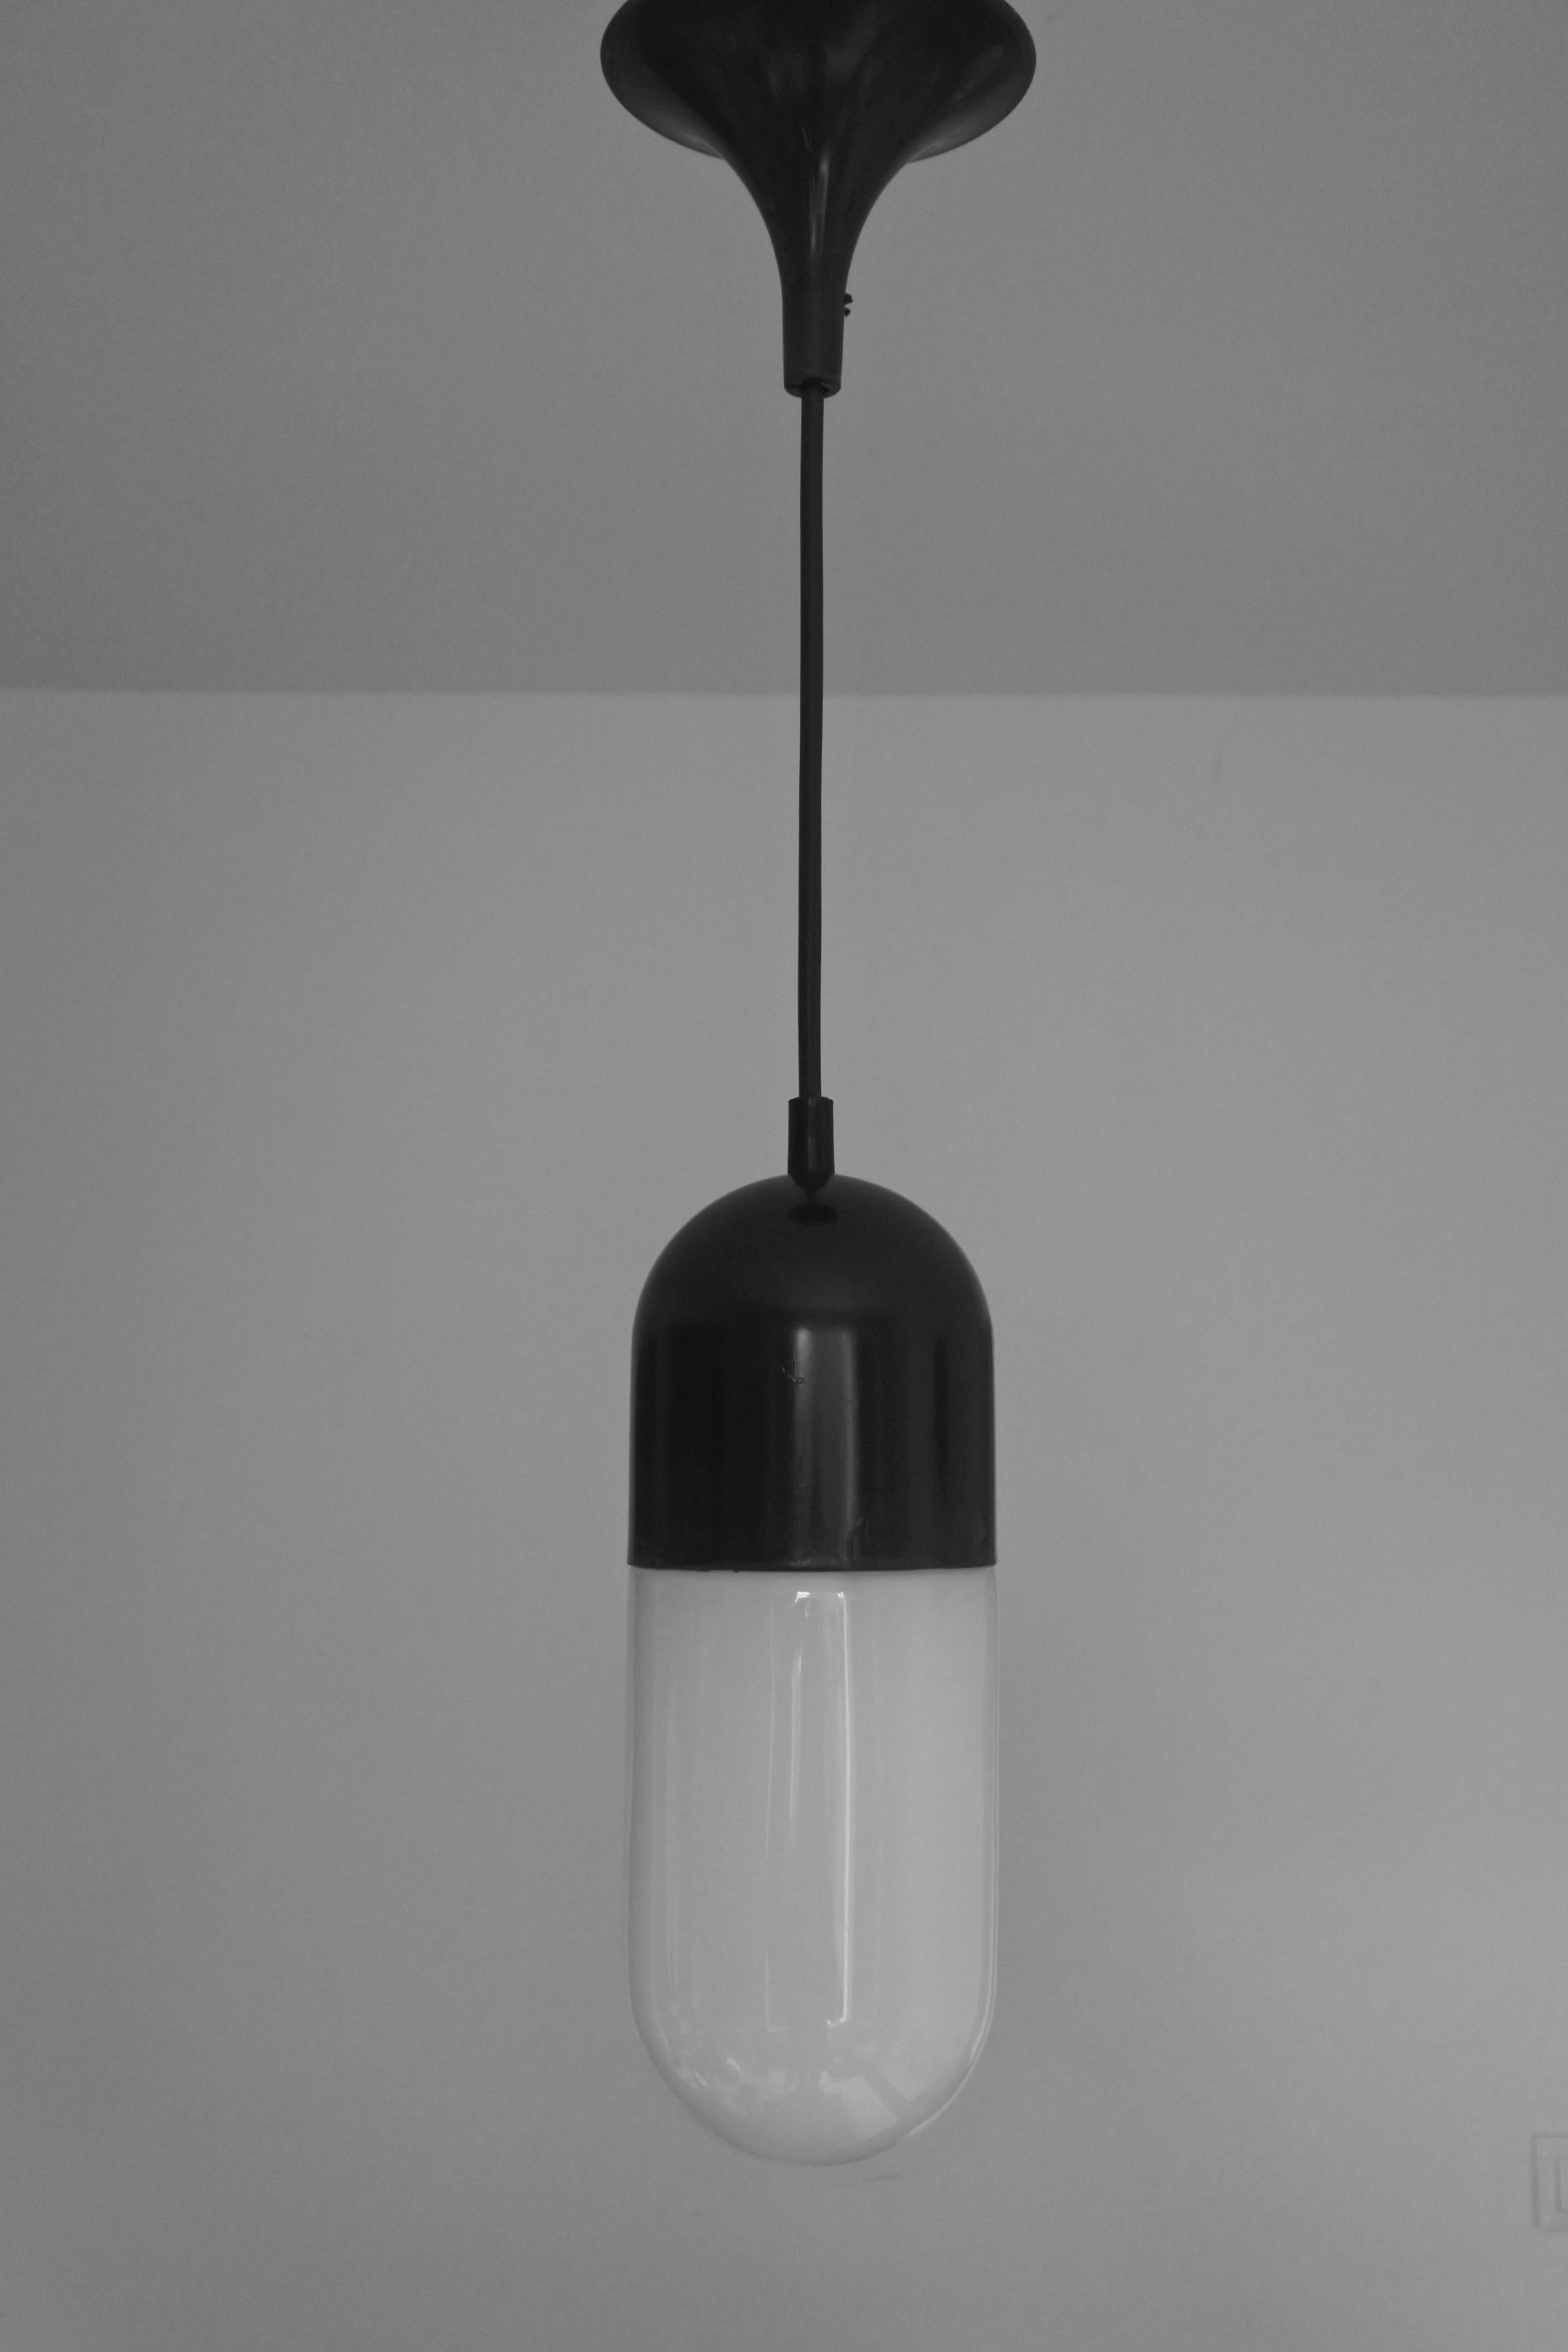 Pill shaped pendant lamp by German lamp manufacturer Peil & Putzler.
Black lacquered metal and white opal glass
6 available.
Works great as a group.
Adjustable height, as shown 130 cm, the cable can easily be shortened or changed to any greater